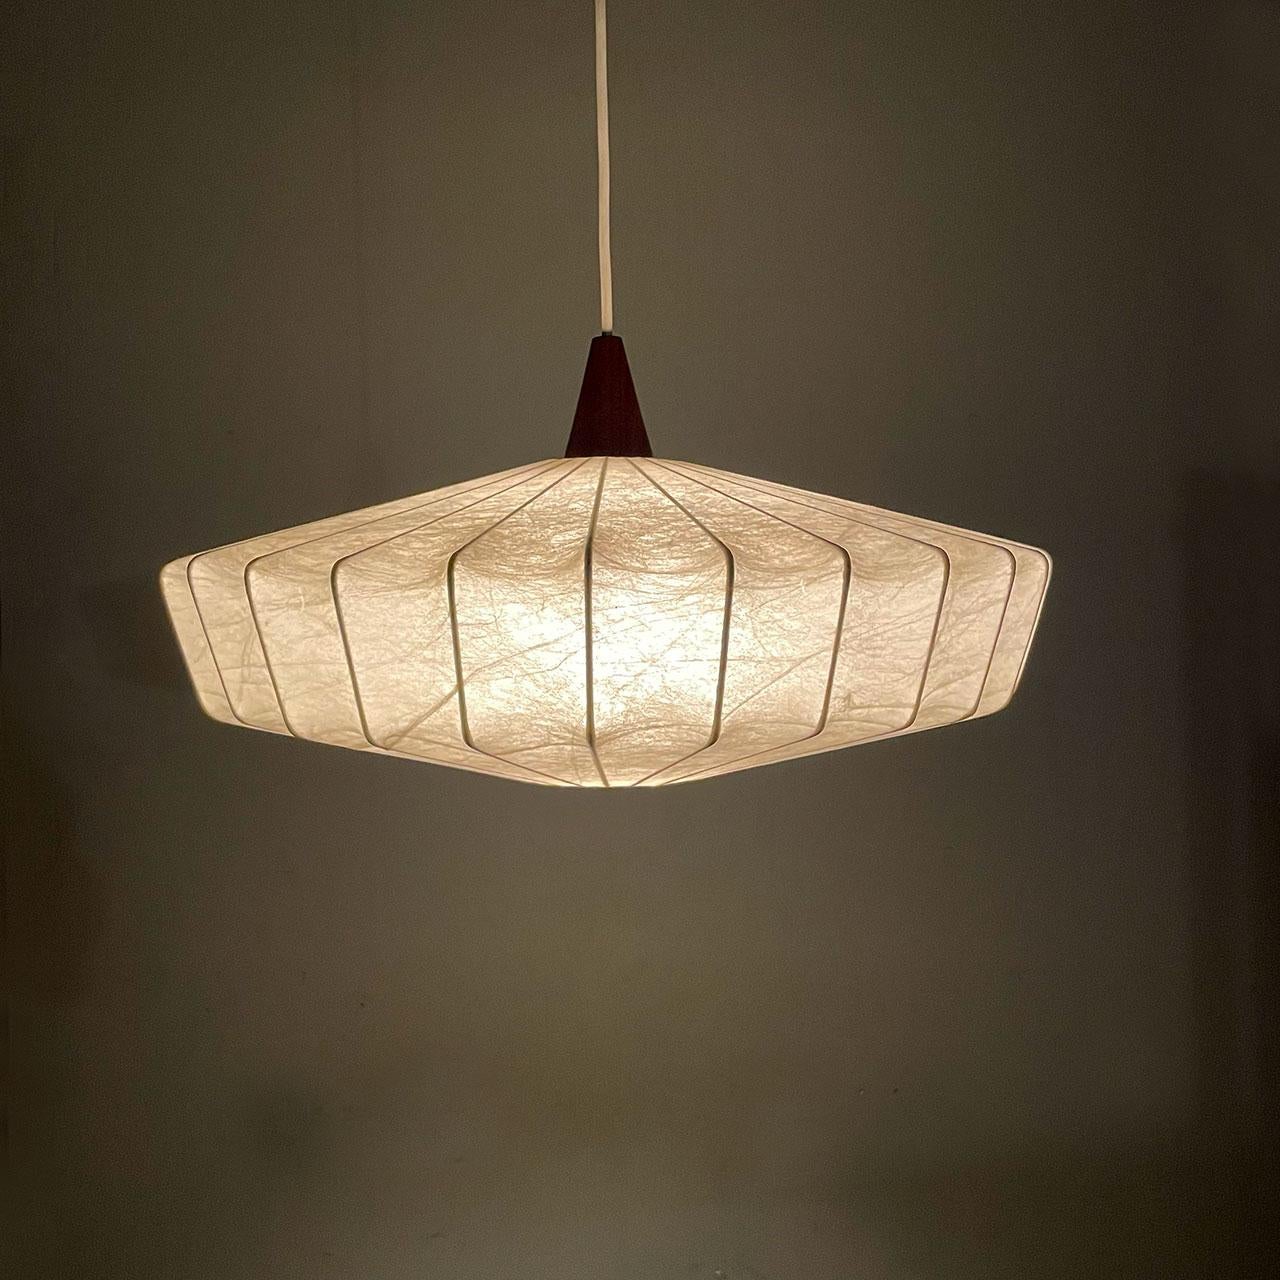 Danish “cocoon” pendant lamp manufactured during the 1950s.
Made from sprayed plastic with a mahogany fitting on top. Rewired.